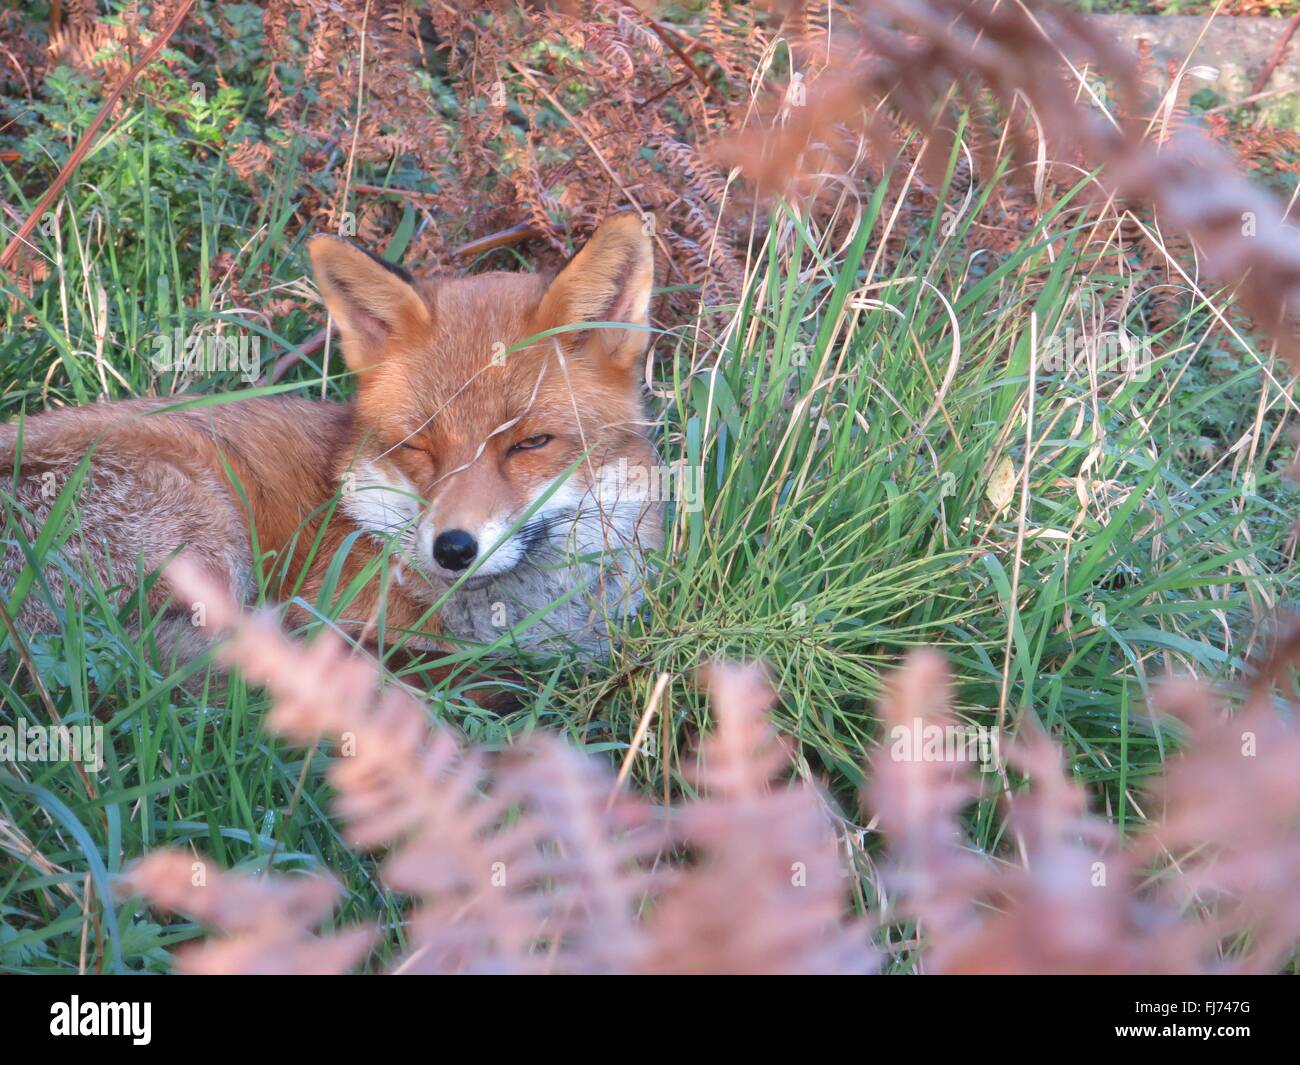 A fox tries to take a nap in Brompton Cemetery, London Stock Photo